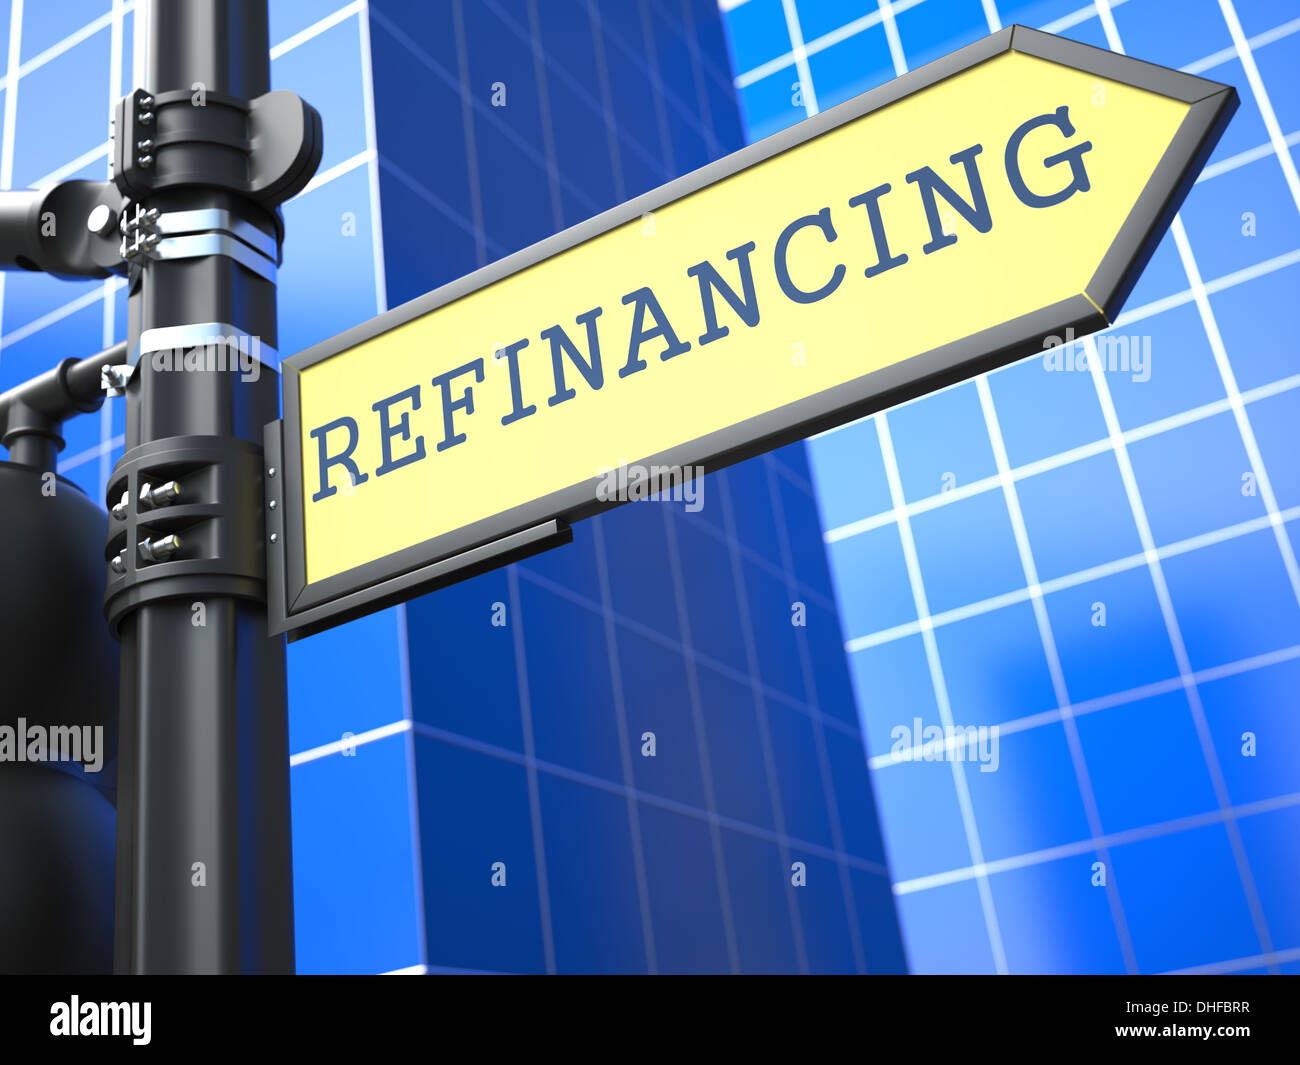 Refinancing. Business Concept. Stock Photo